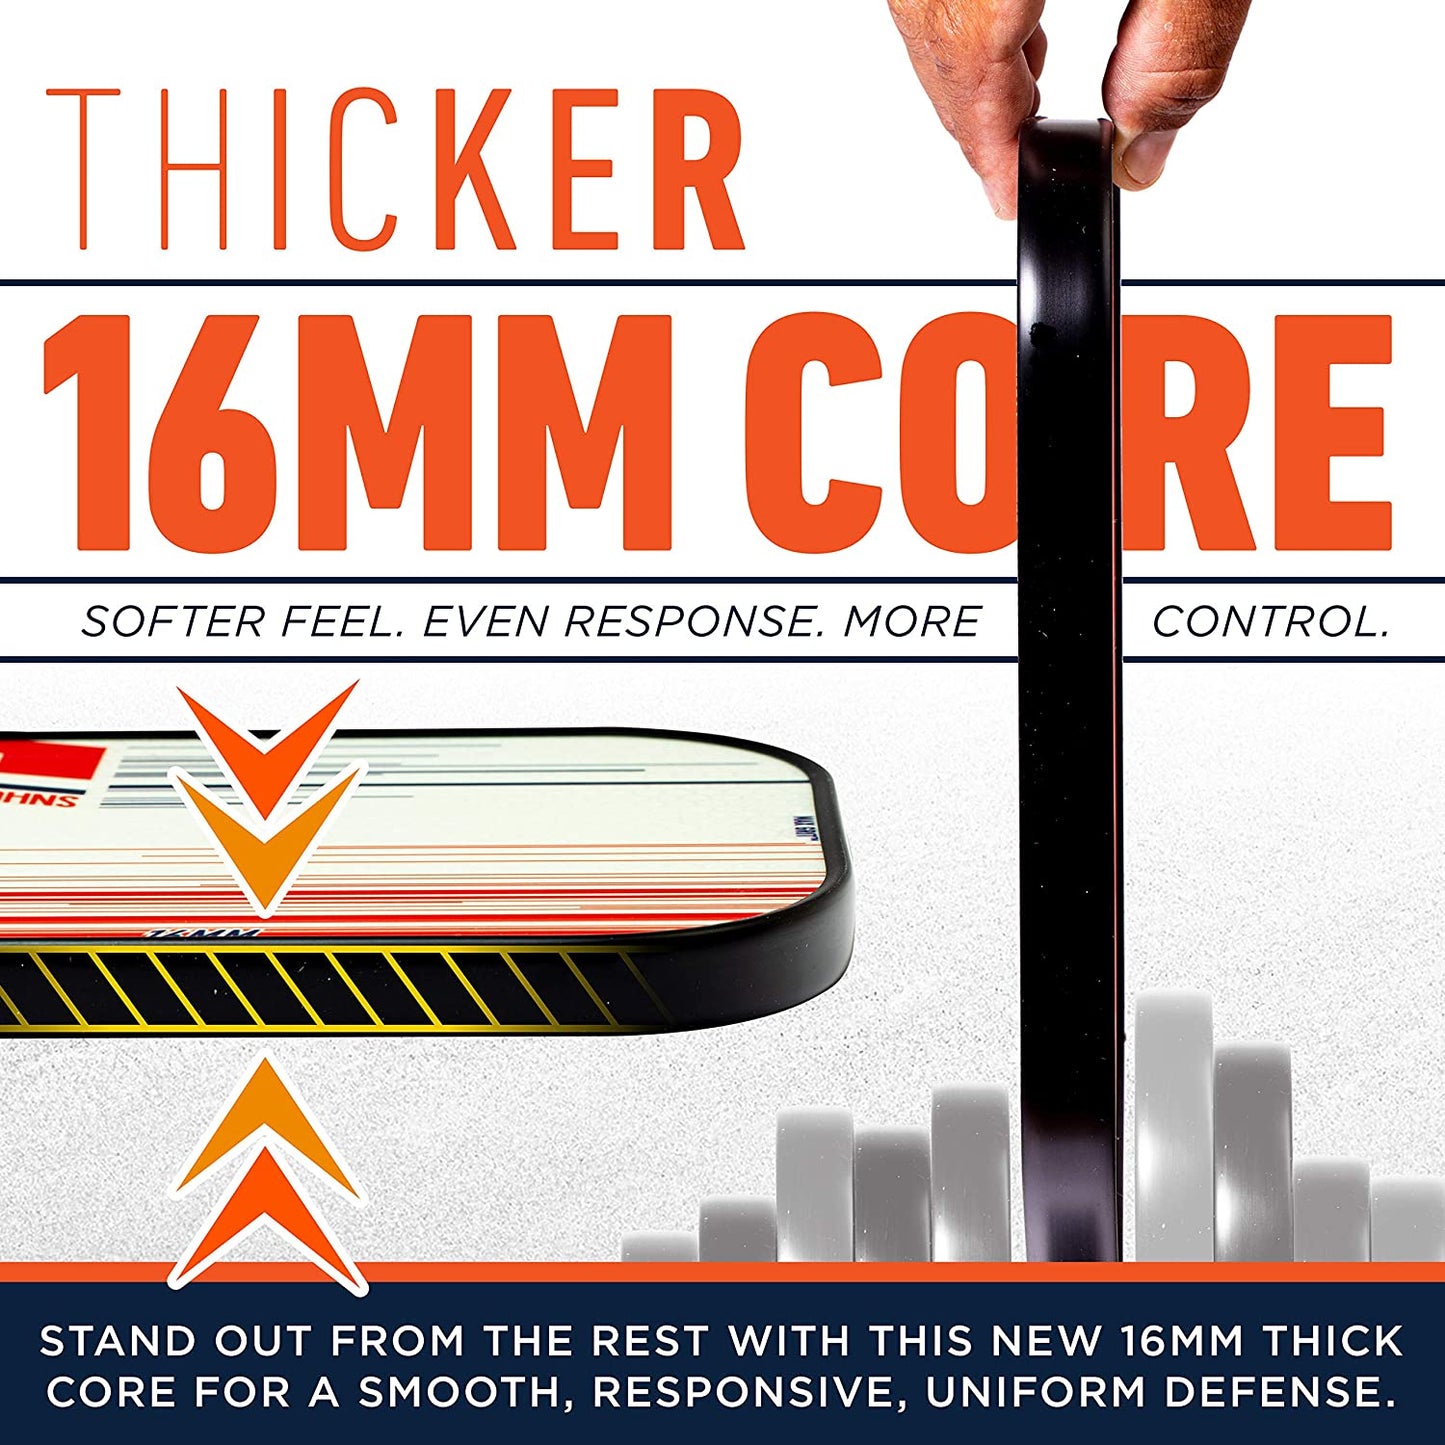 A person is holding a thicker 16mm core.